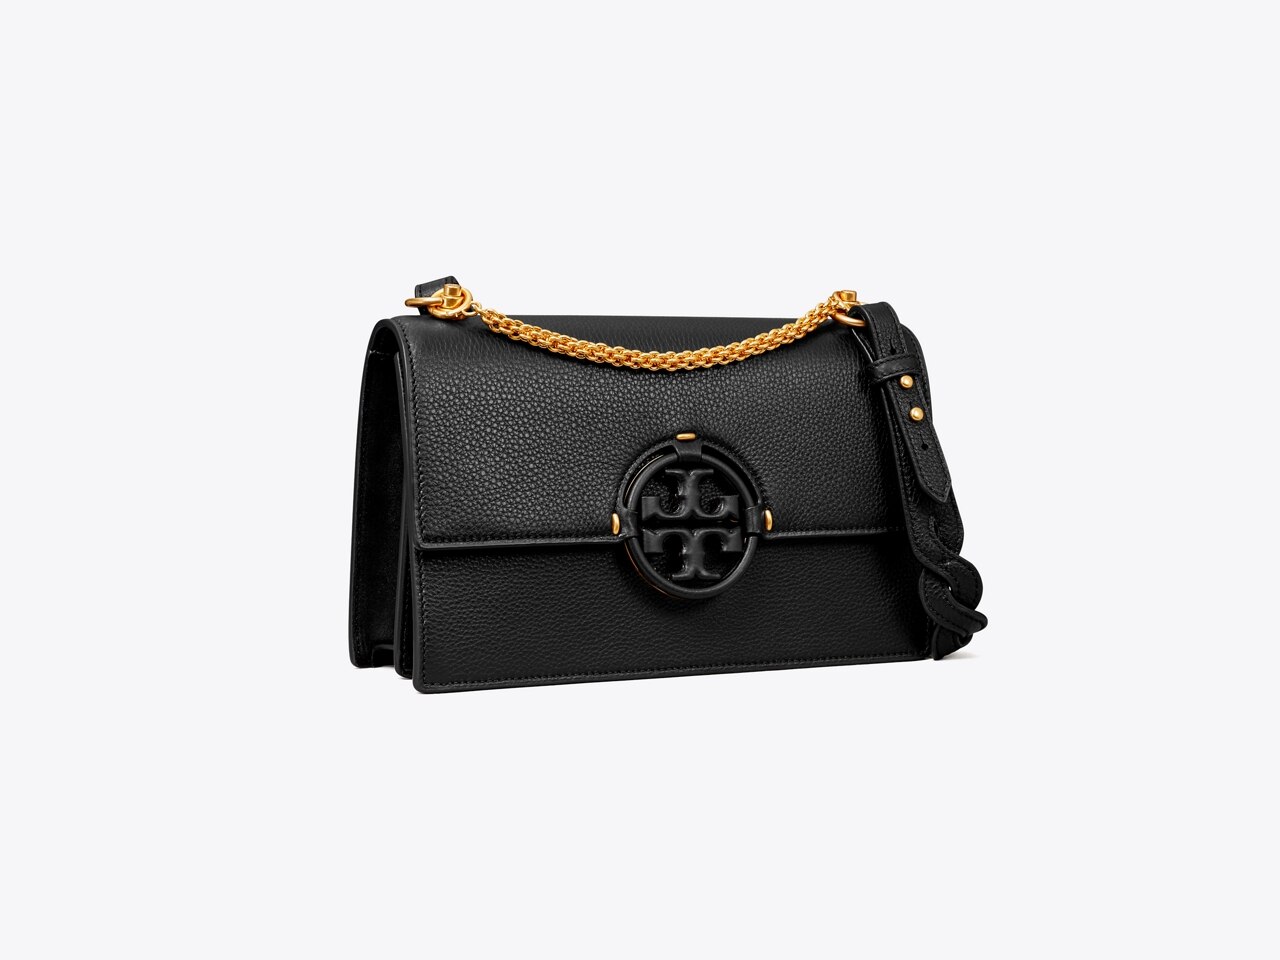 The new Miller shoulder bag from @toryburch has us SWOONING